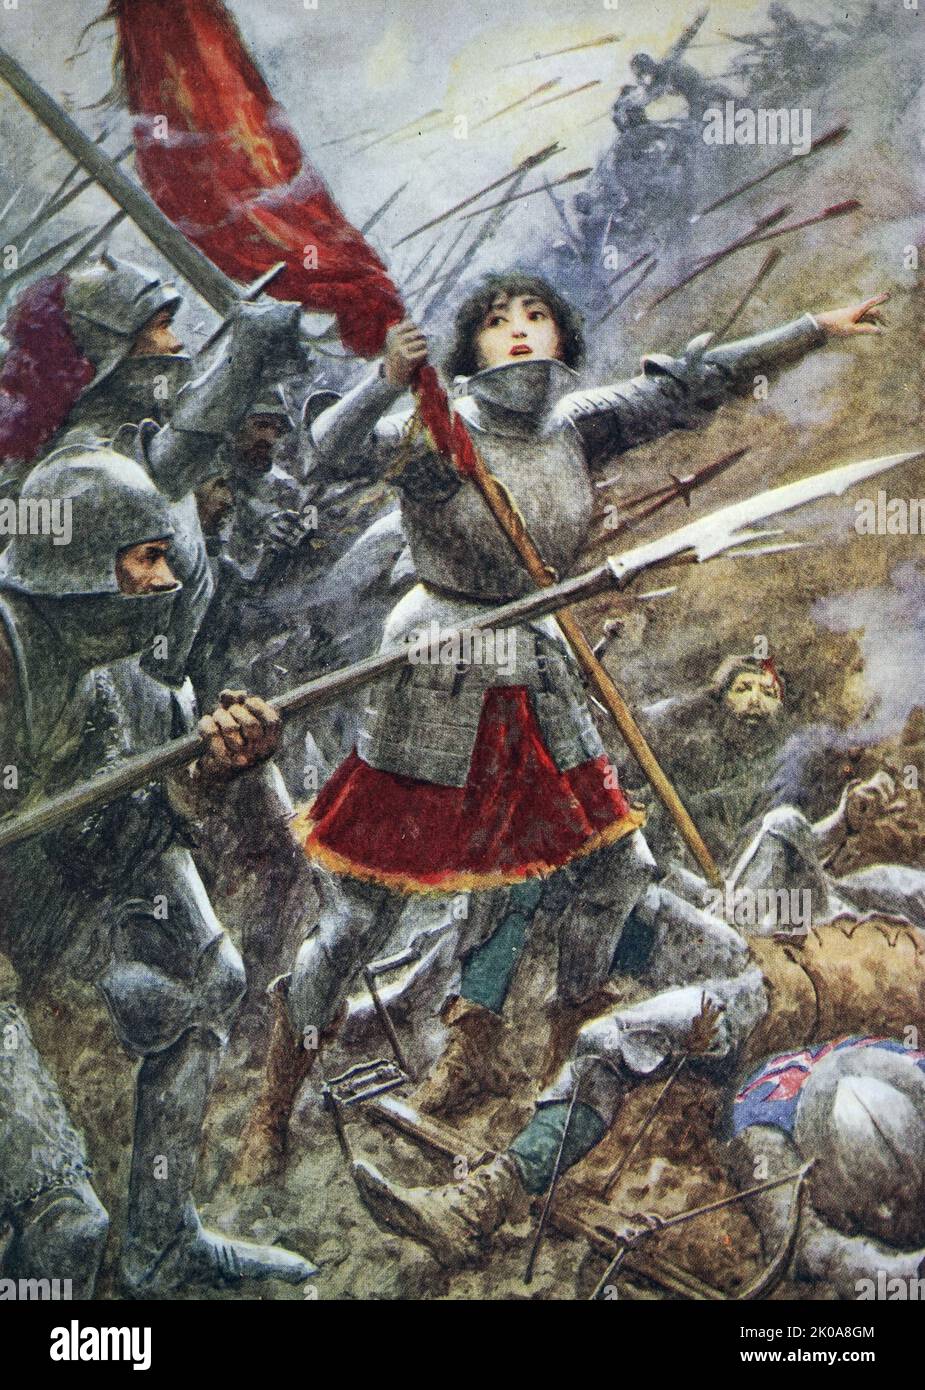 Painting of Joan of Arc in battle. Joan of Arc (c. 1412 - 30 May 1431), nicknamed "The Maid of Orleans" (French: La Pucelle d'Orleans), is considered a heroine of France for her role during the Lancastrian phase of the Hundred Years' War, and was canonized as a saint. Stock Photo